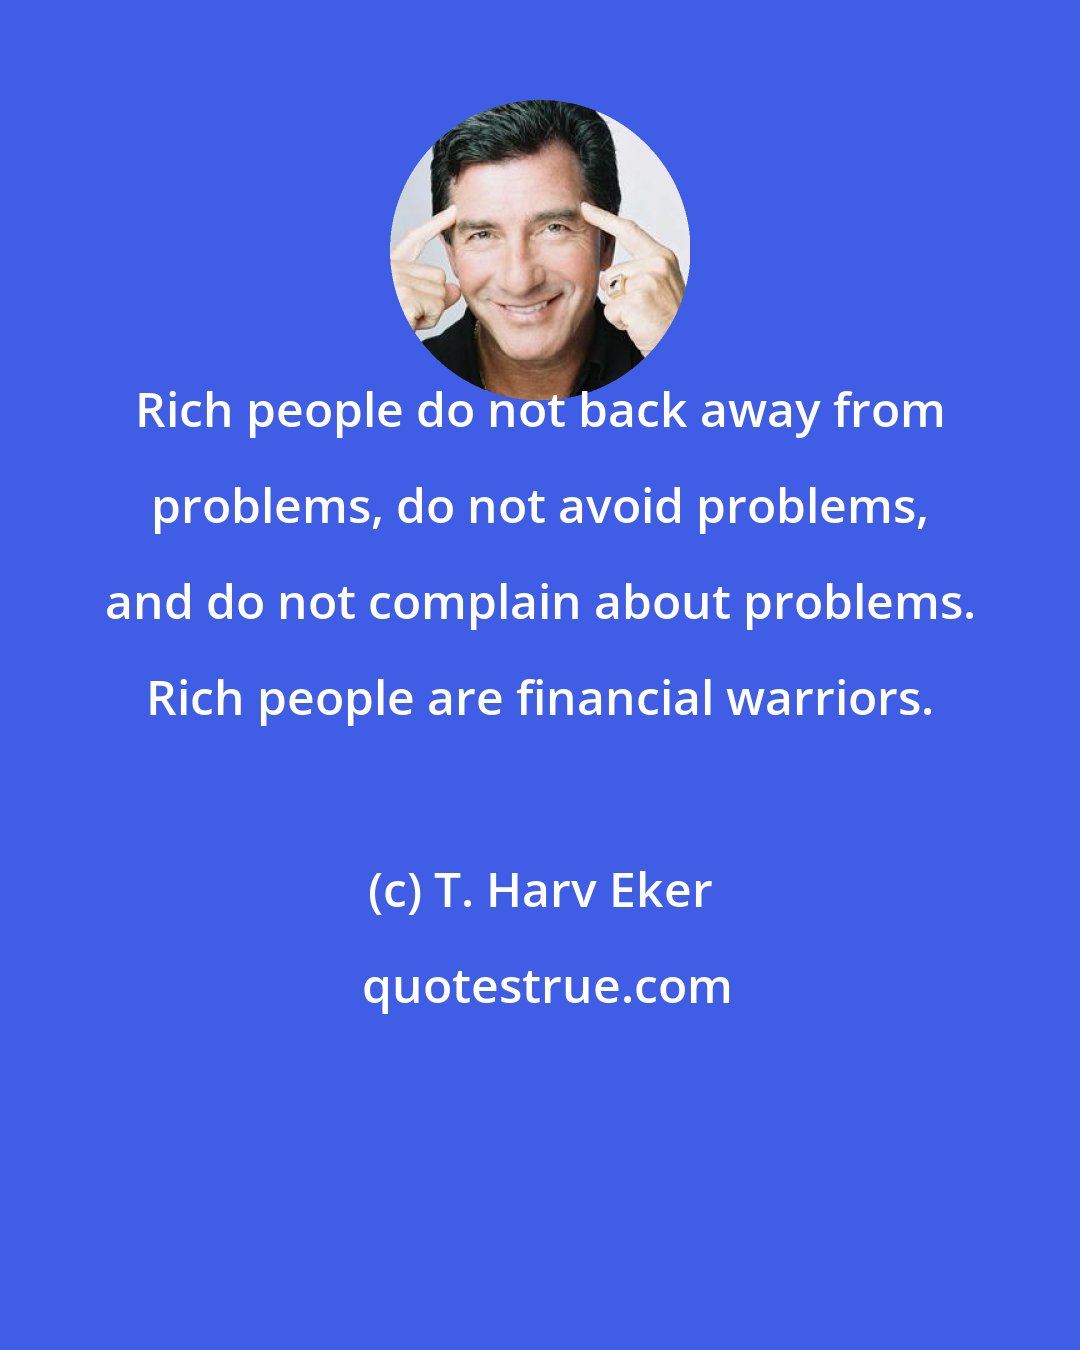 T. Harv Eker: Rich people do not back away from problems, do not avoid problems, and do not complain about problems. Rich people are financial warriors.